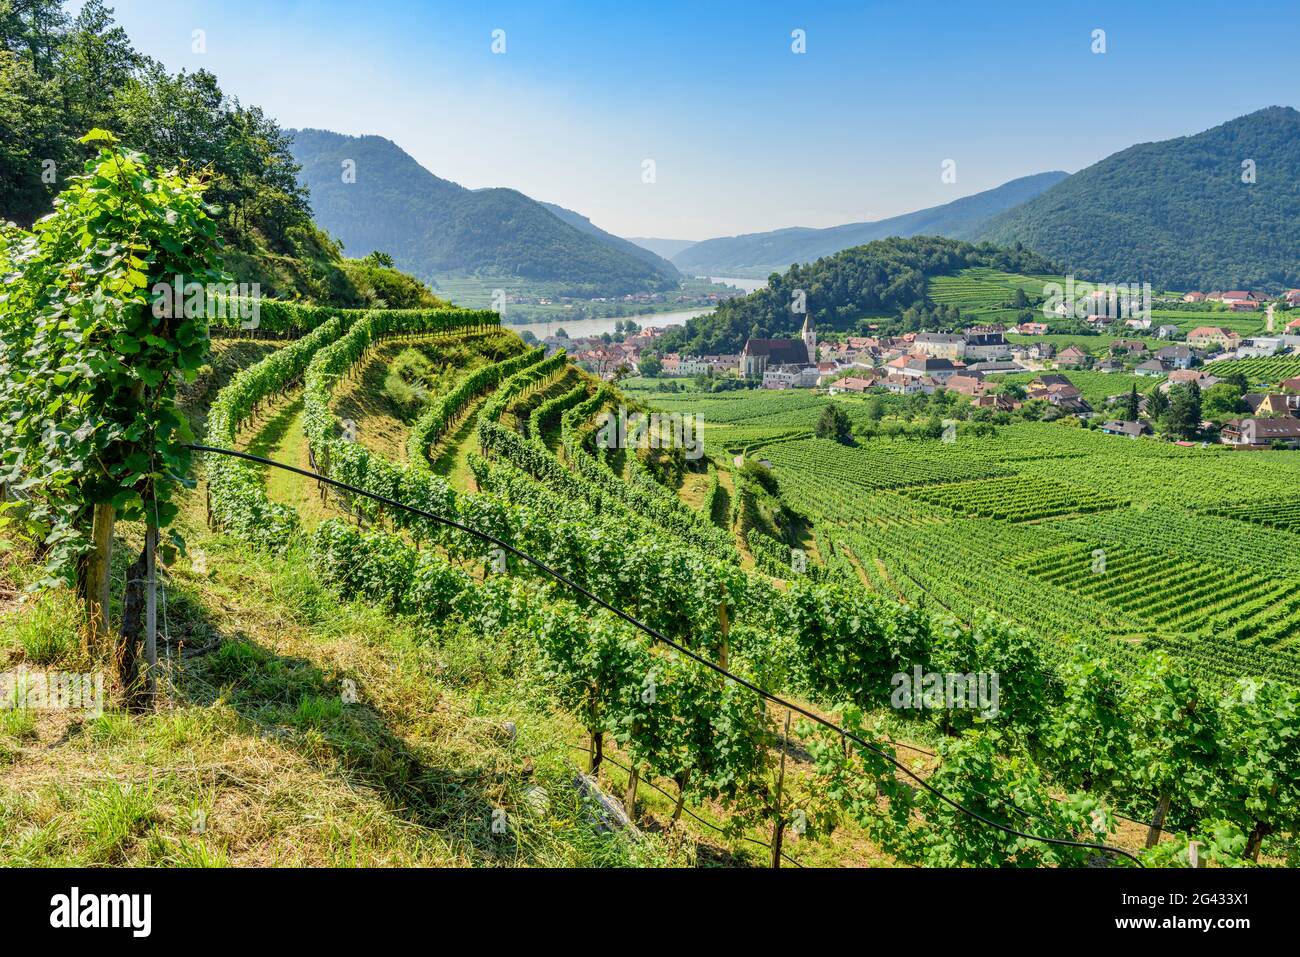 Spitz An Der Donau High Resolution Stock Photography and Images - Alamy